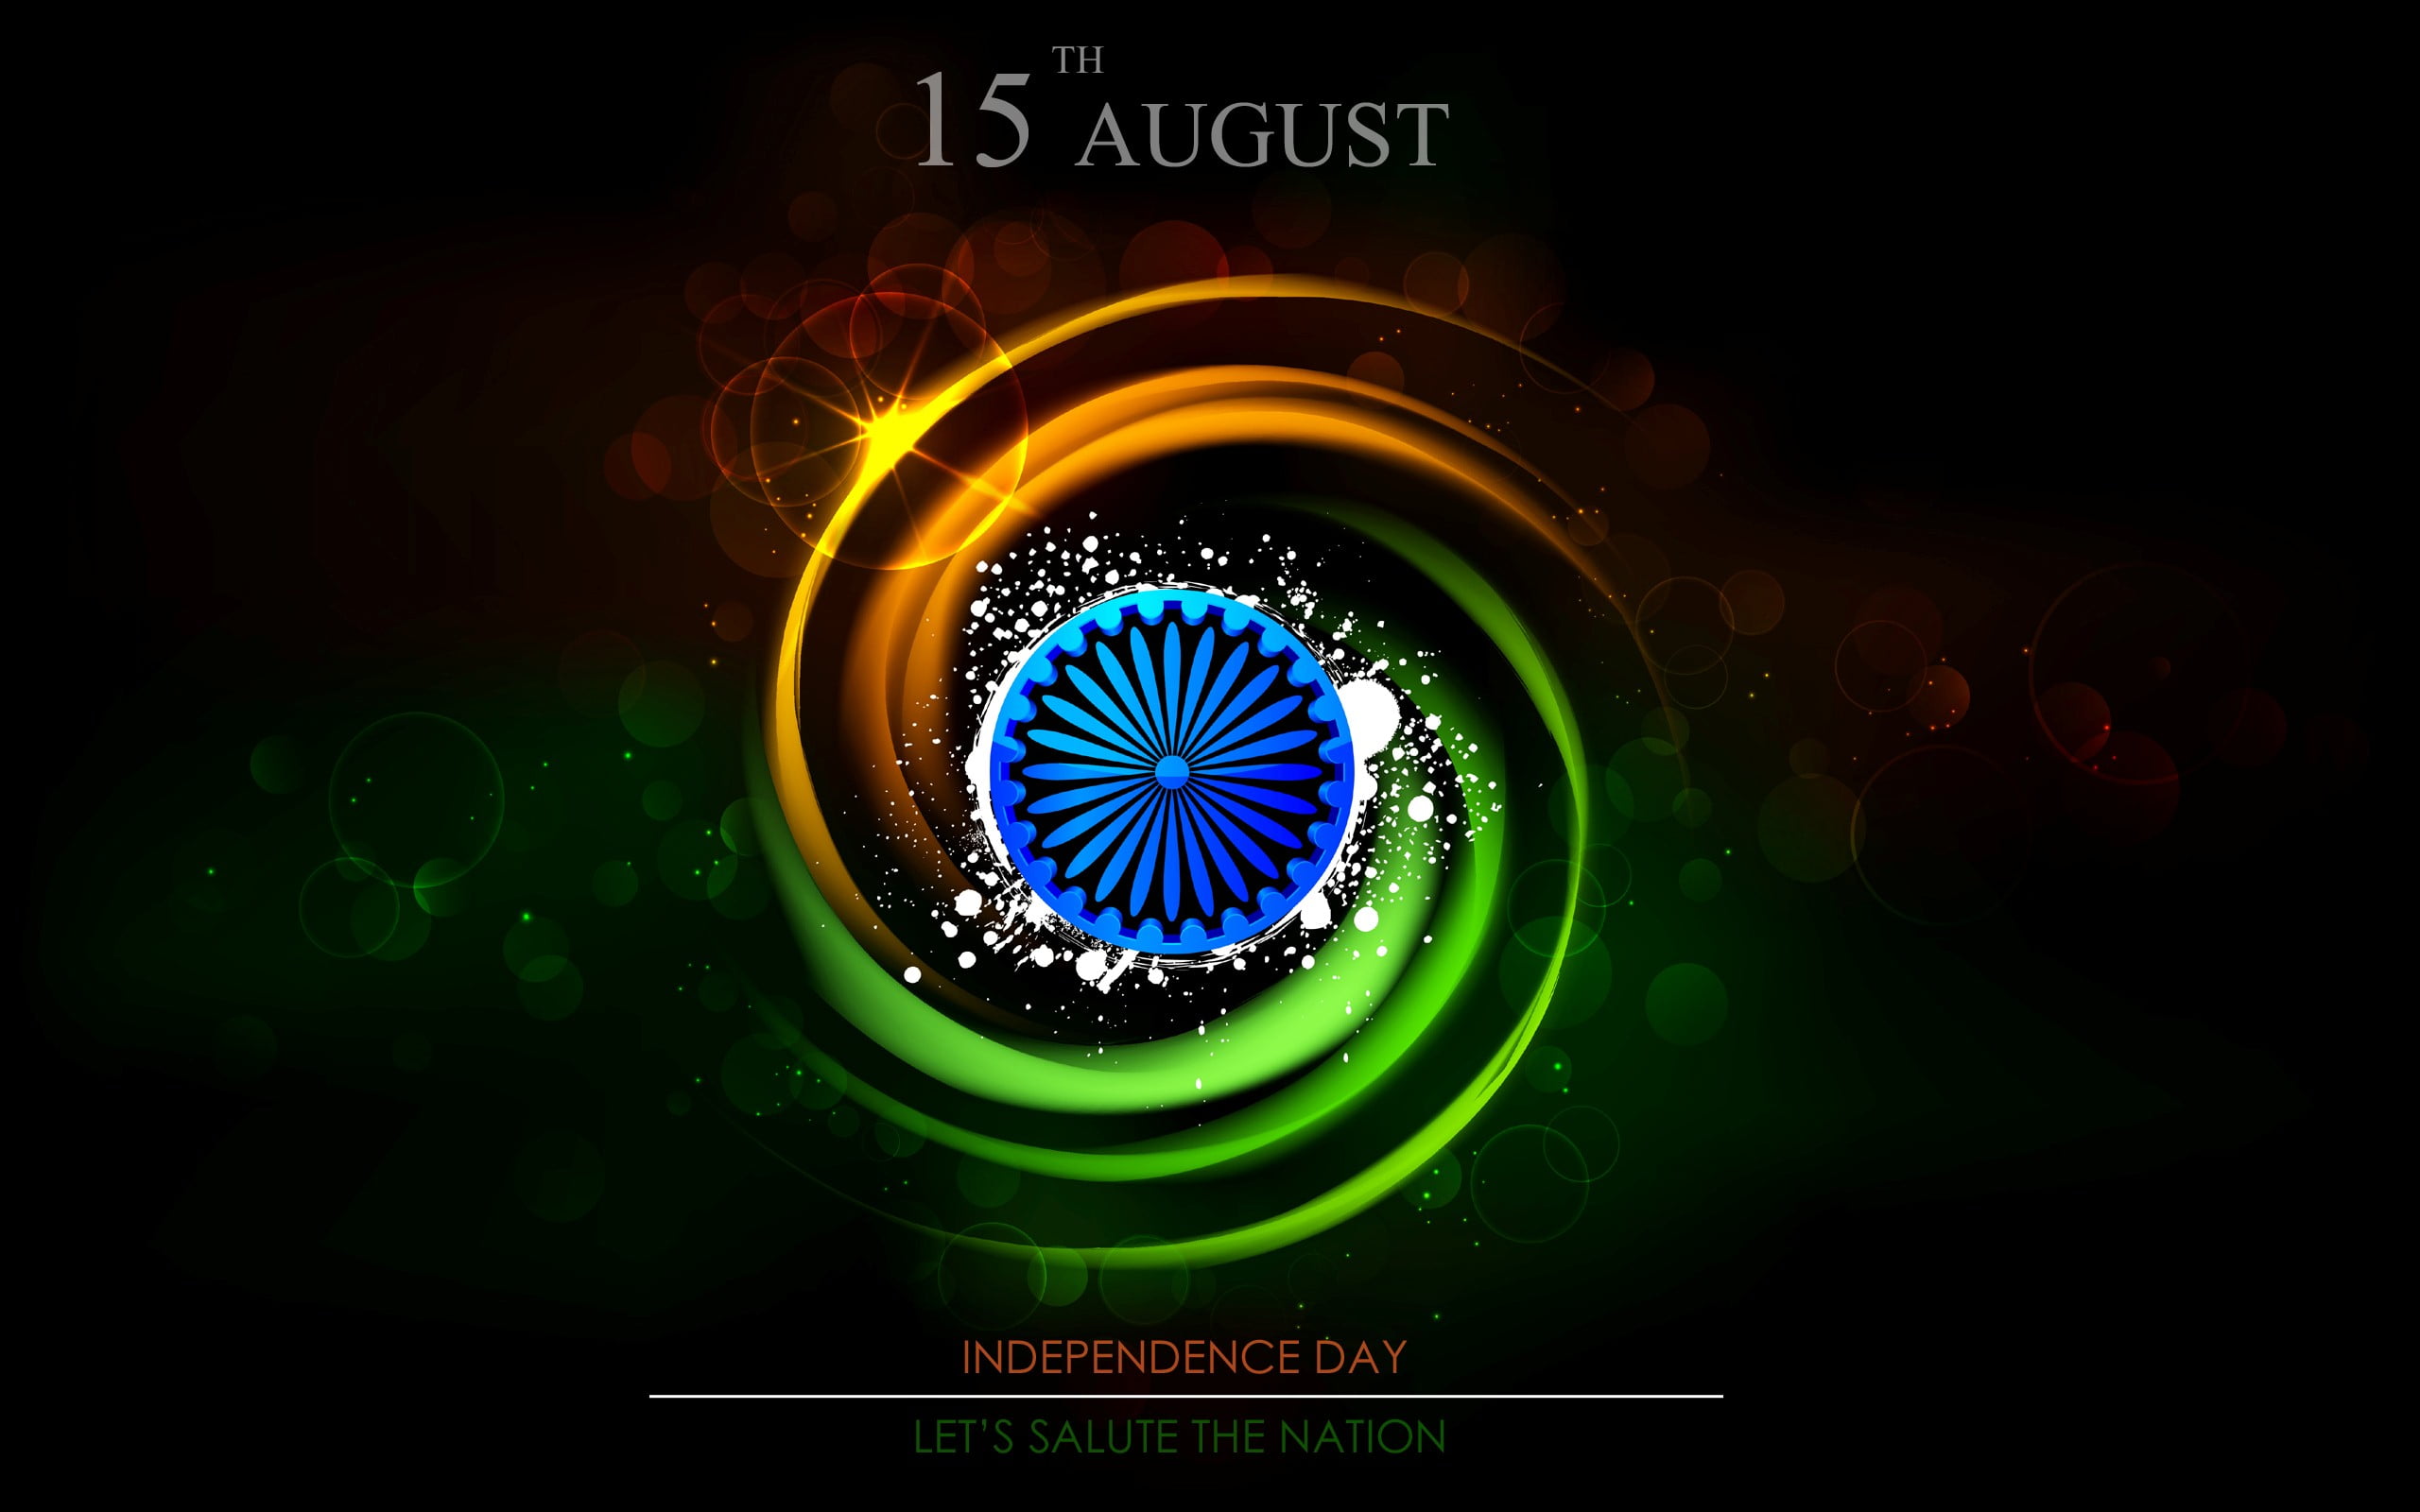 15 August Lets Salute The Nation, Happy Diwali Independence Day illustration